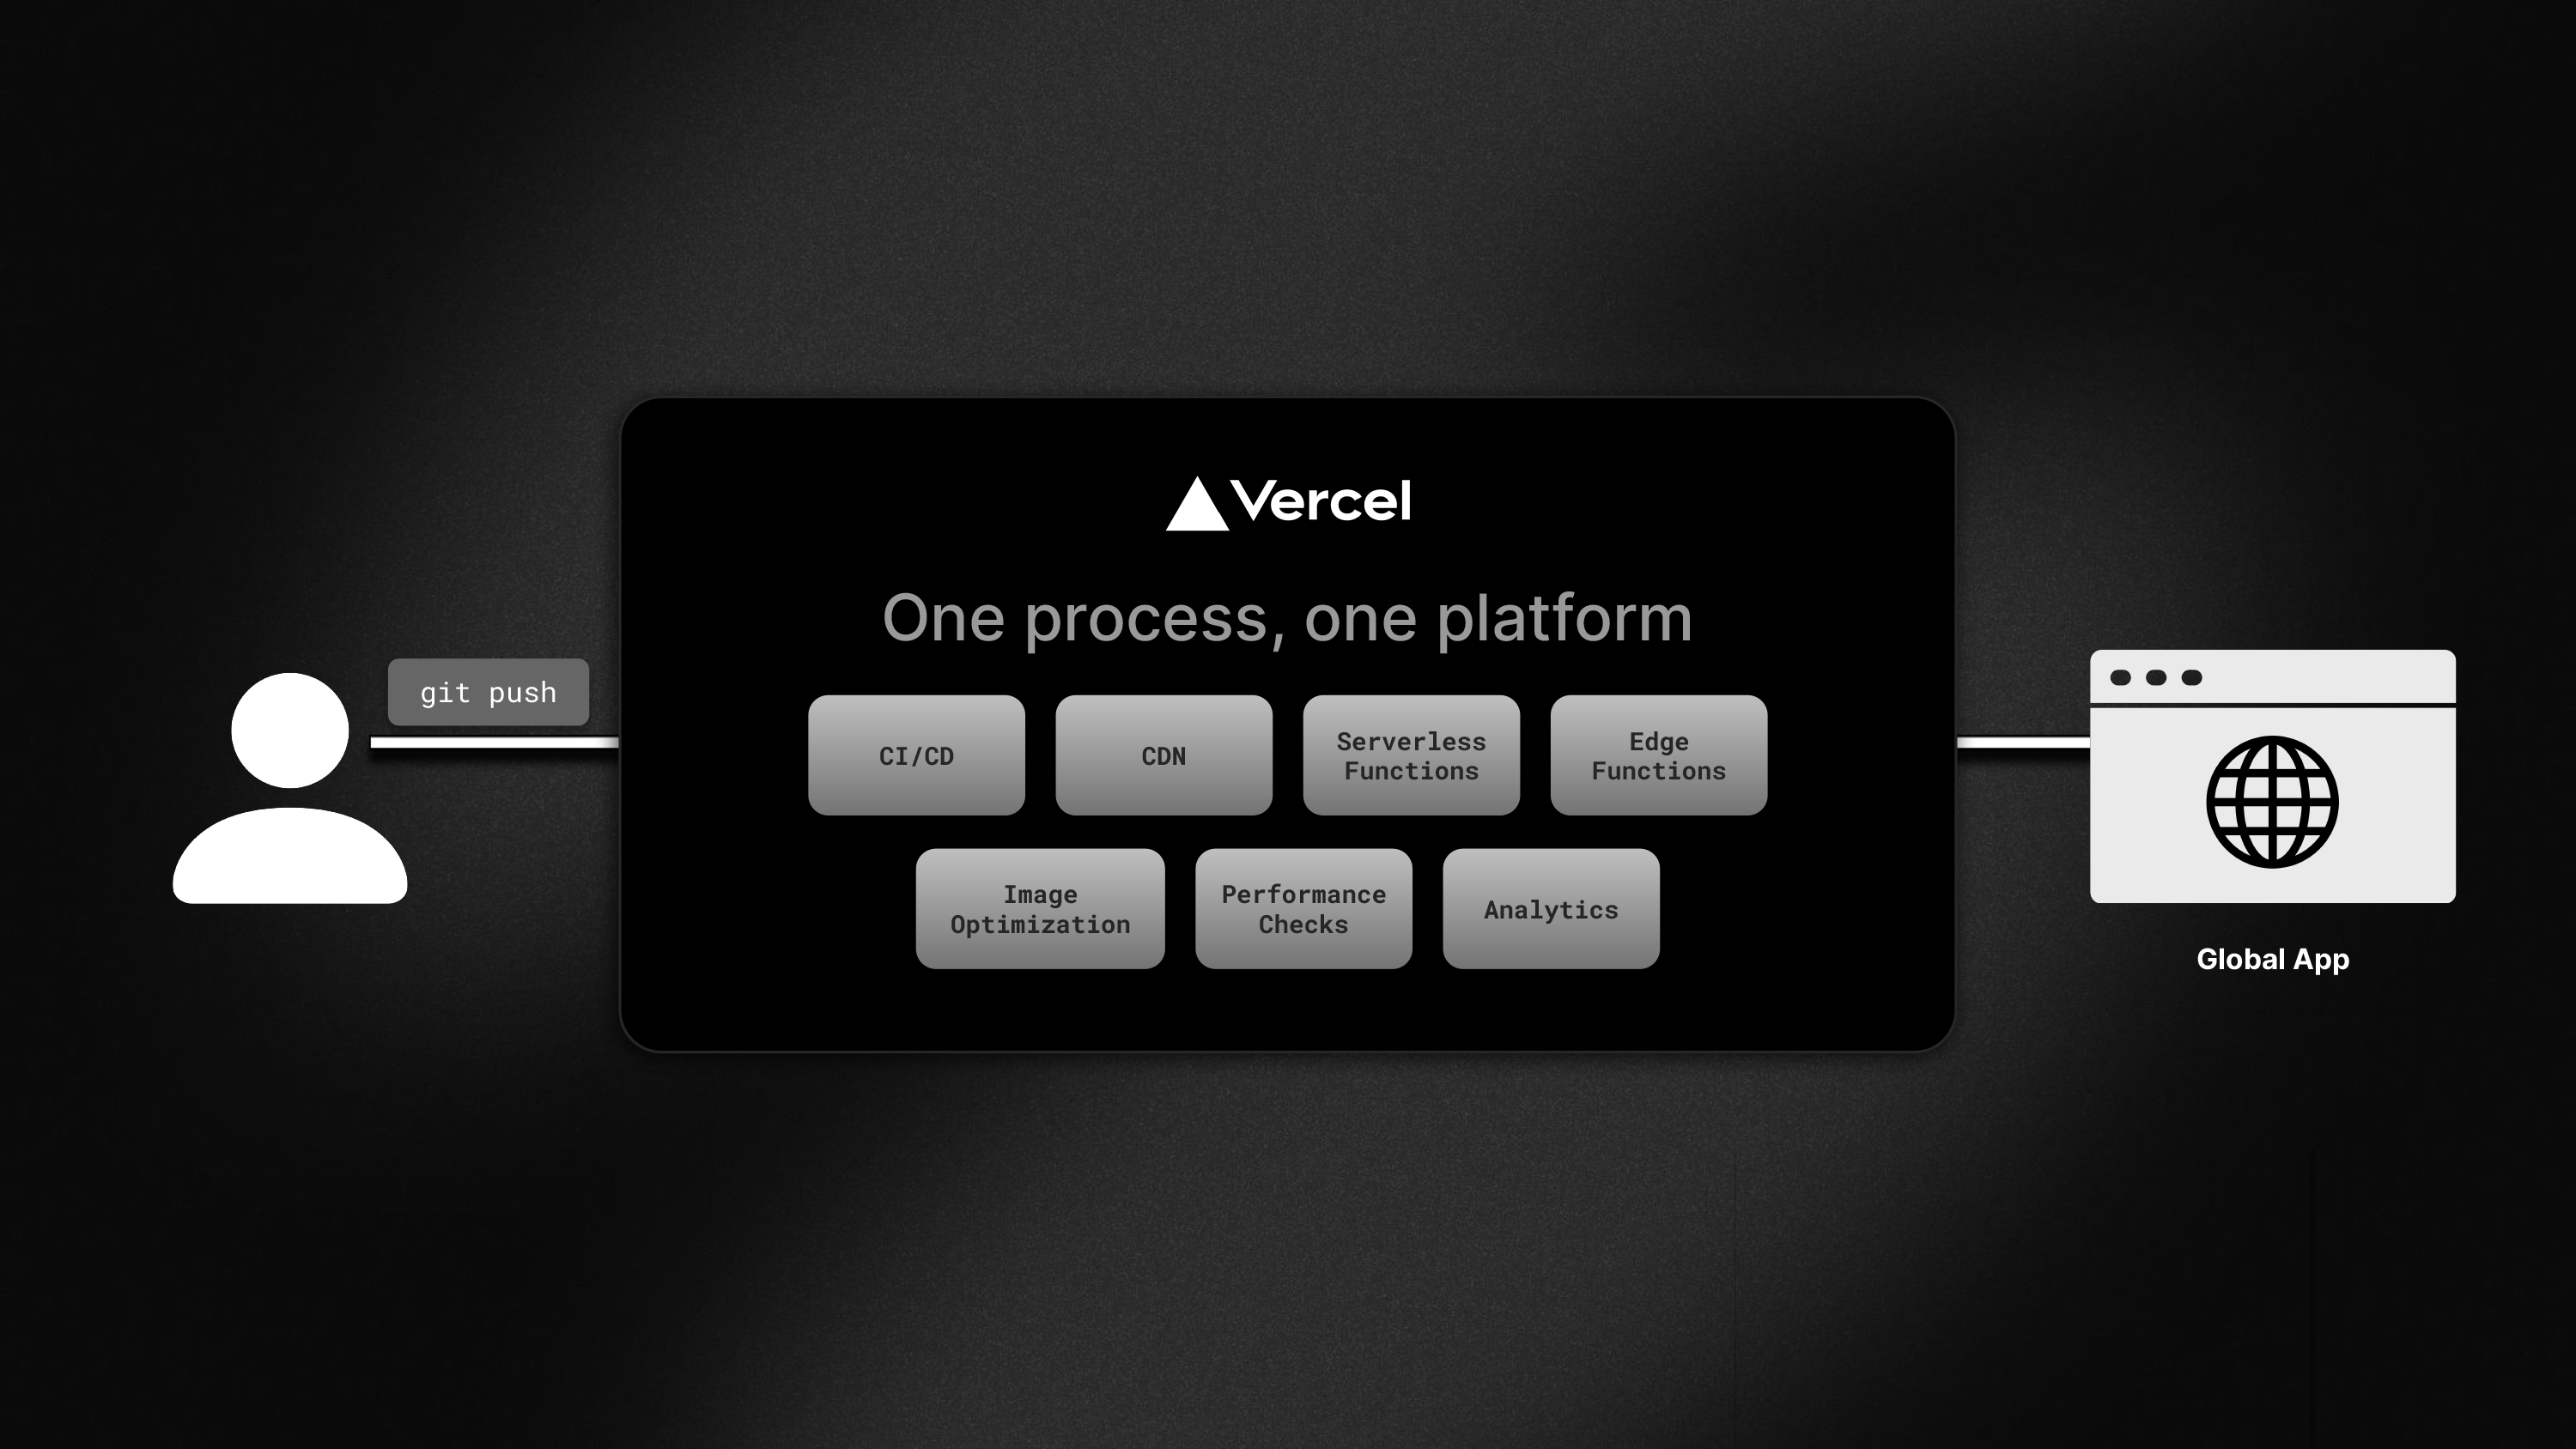 Vercel provides one unified process, instead of developers needing to balance CDNs, clusters, functions, caching infrastructure, and more. 